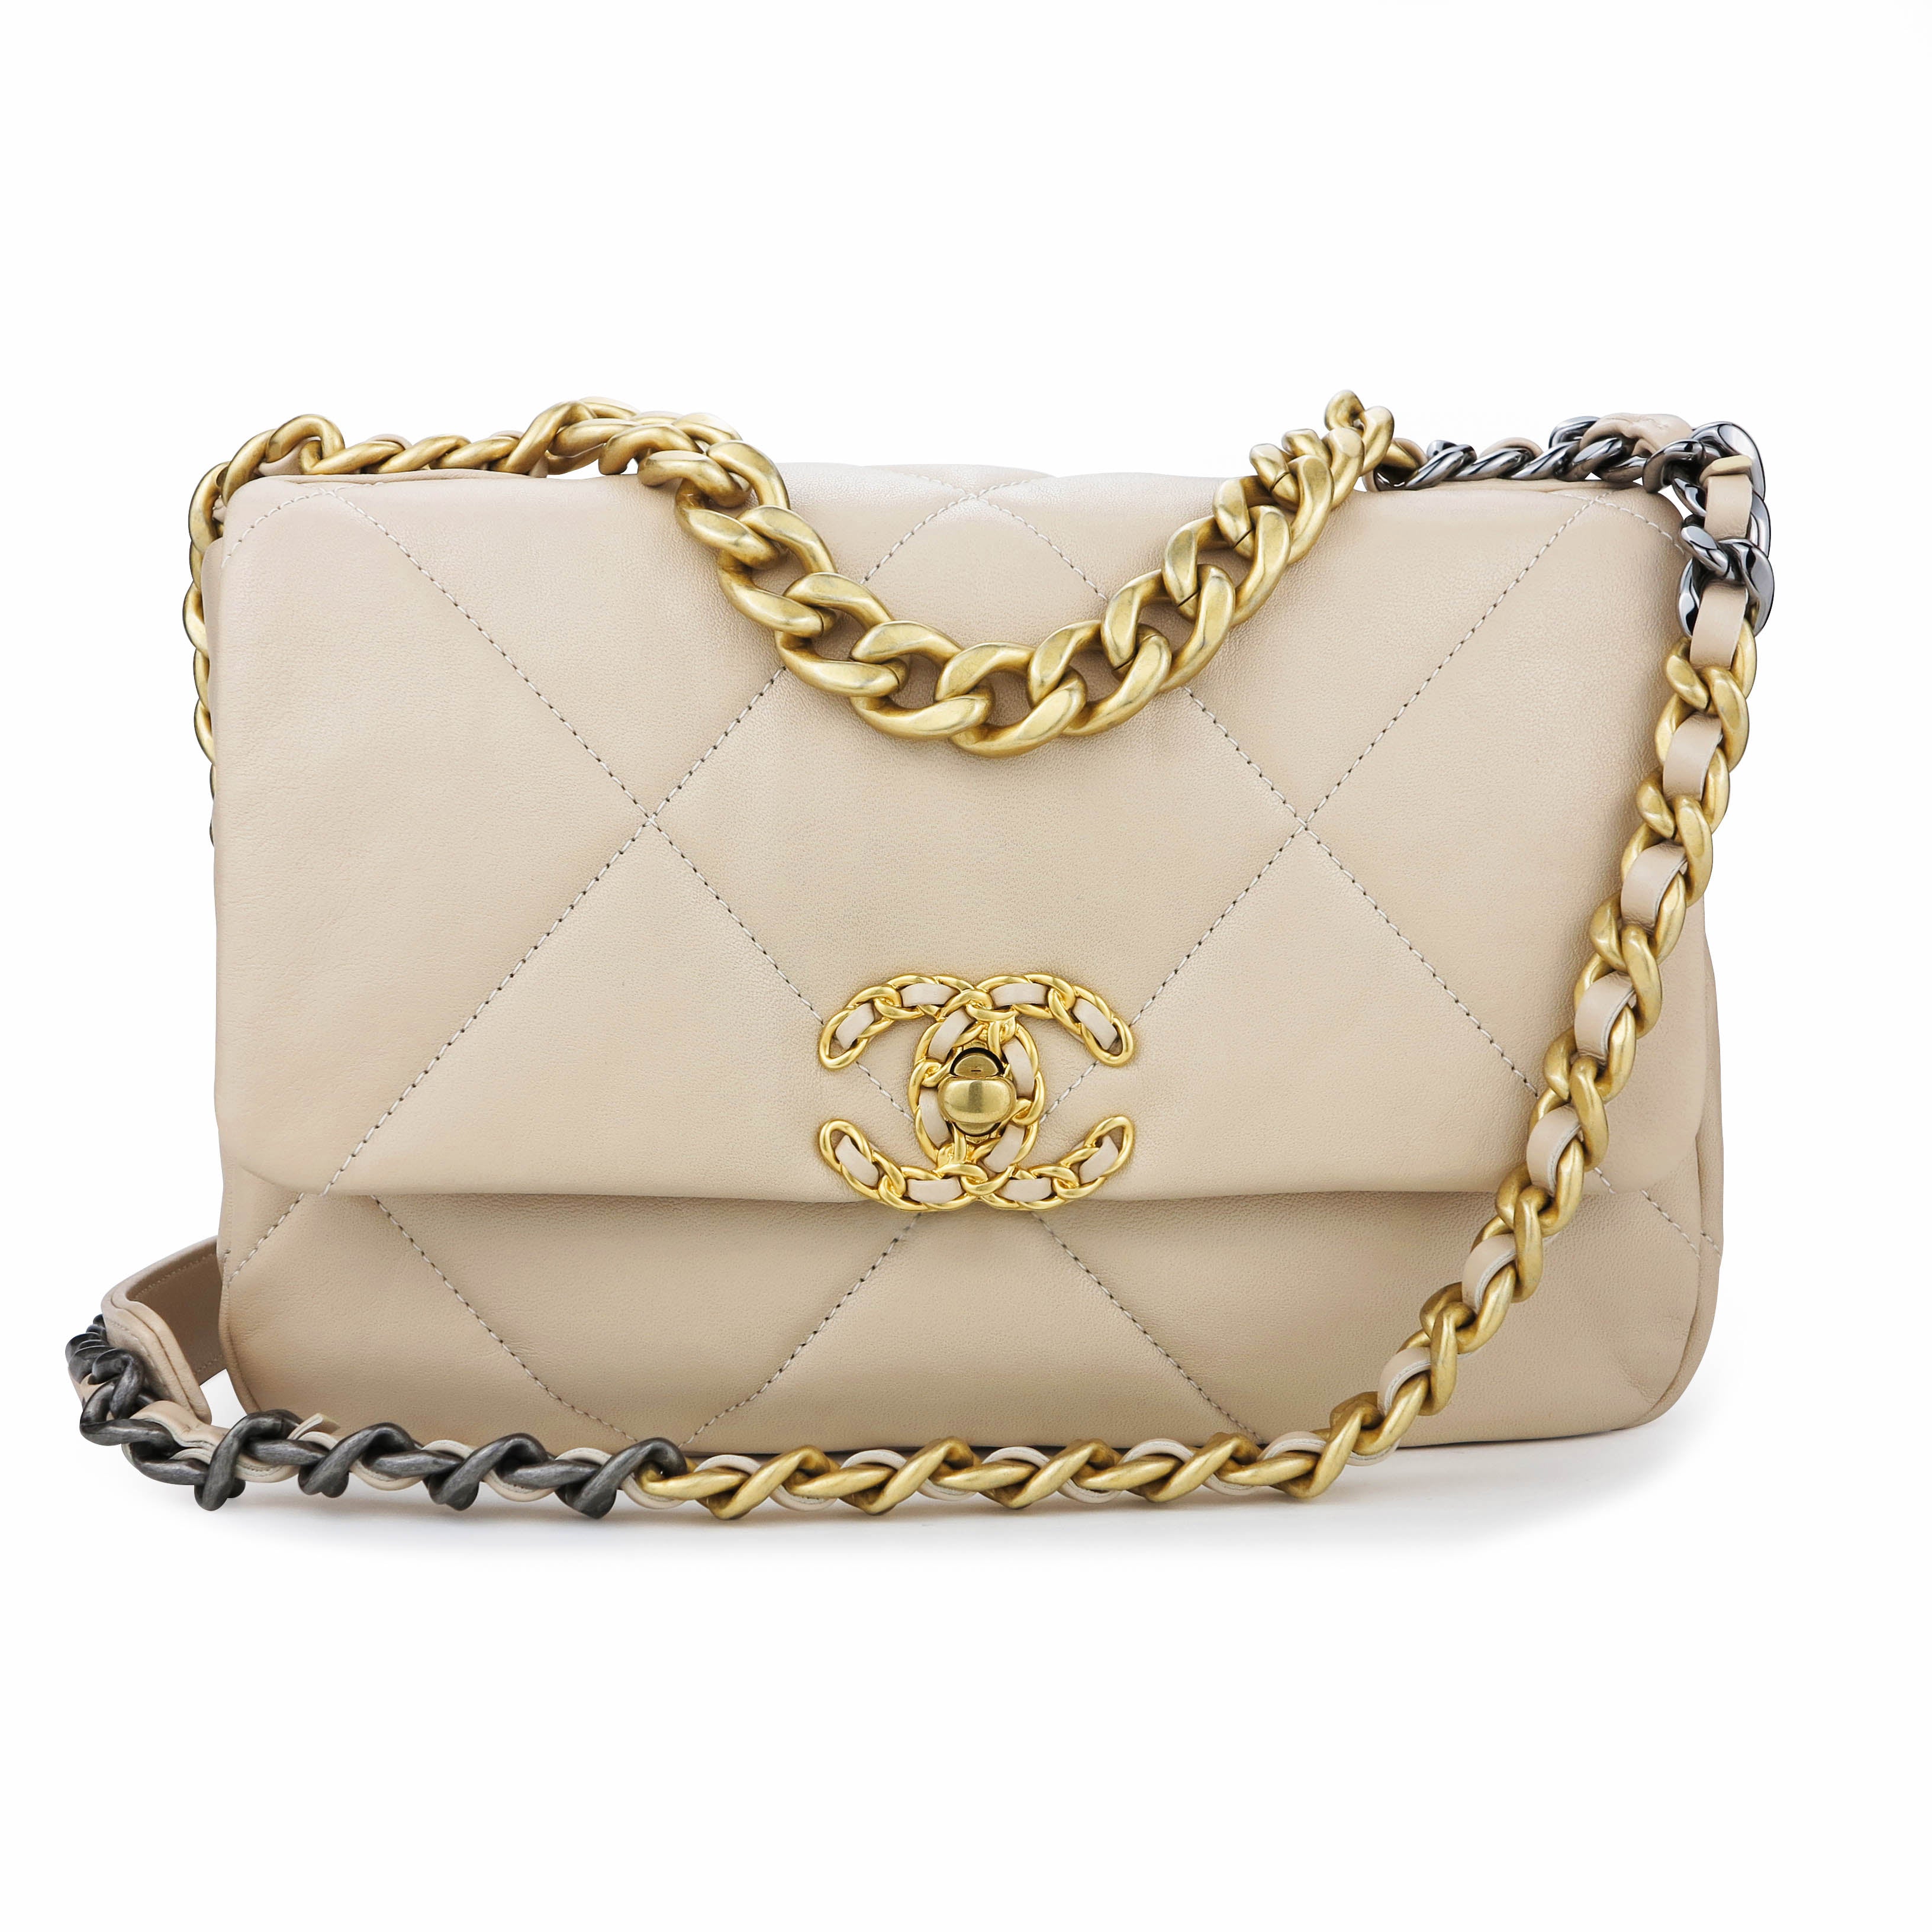 Get your hands on the stunning Chanel Beige 19 Bag with Mixed Metal  Hardware – Only Authentics